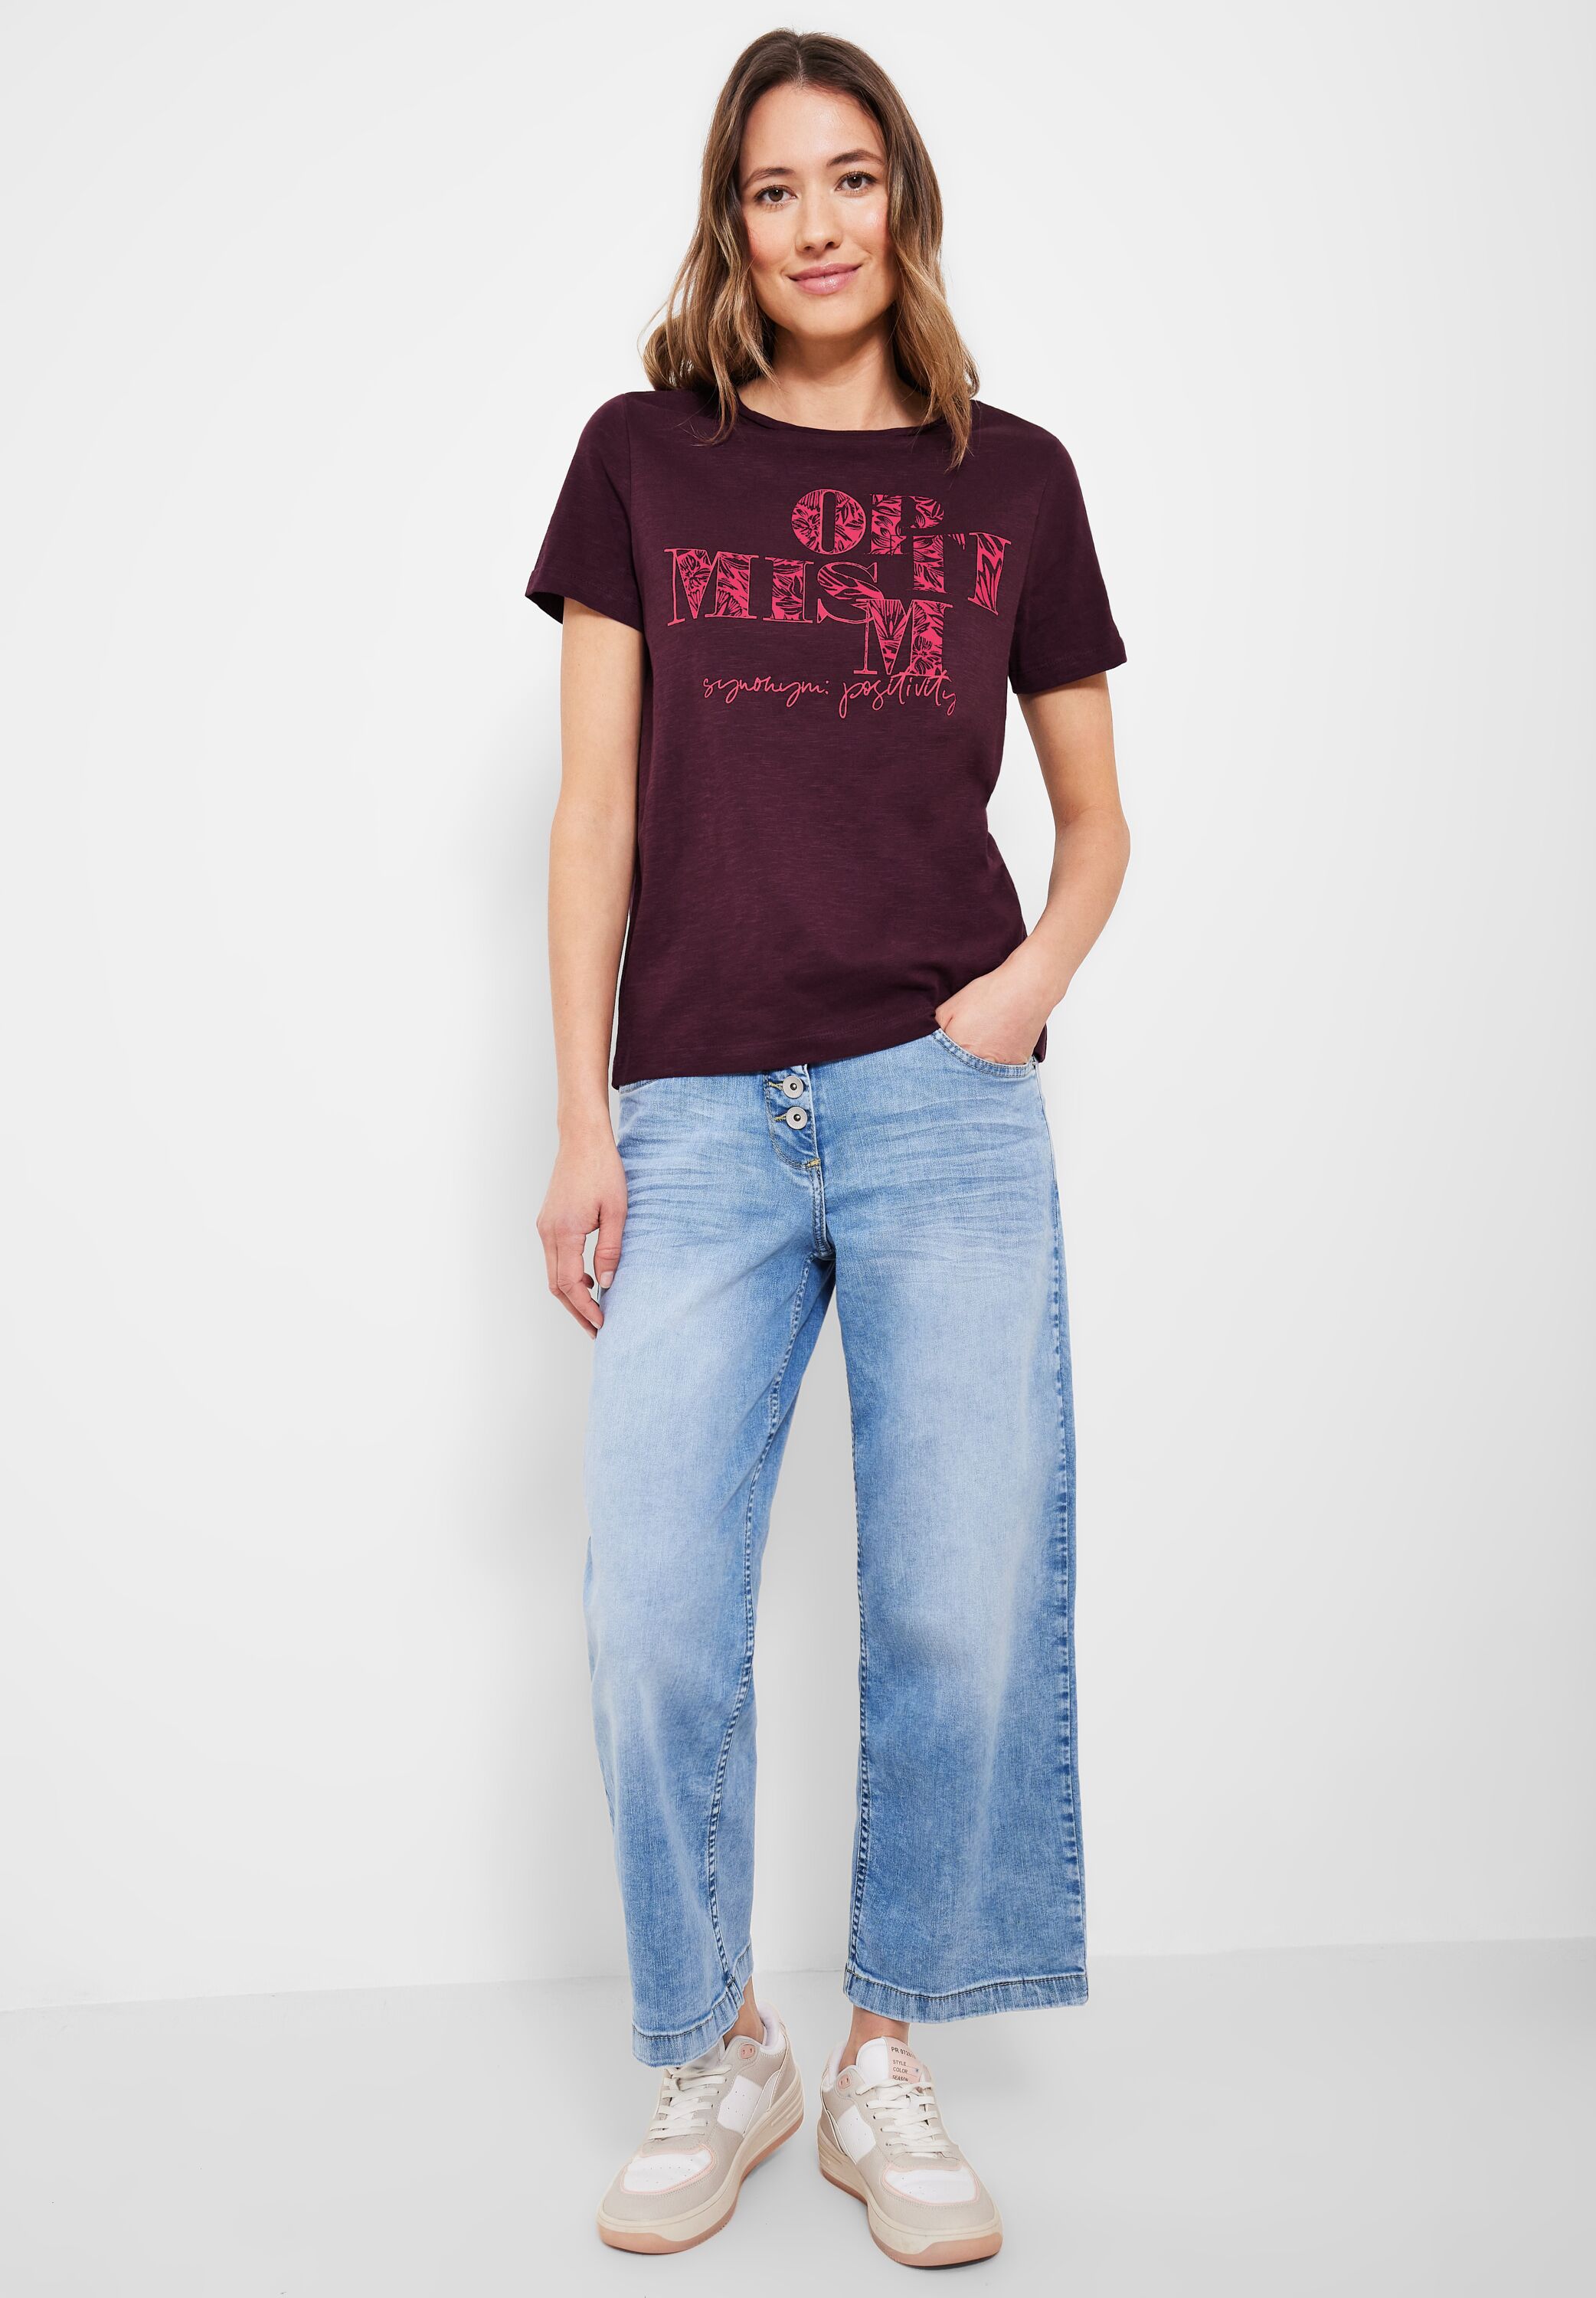 CECIL T-Shirt in Wineberry Mode SALE B319637-34918 CONCEPT im reduziert Red 